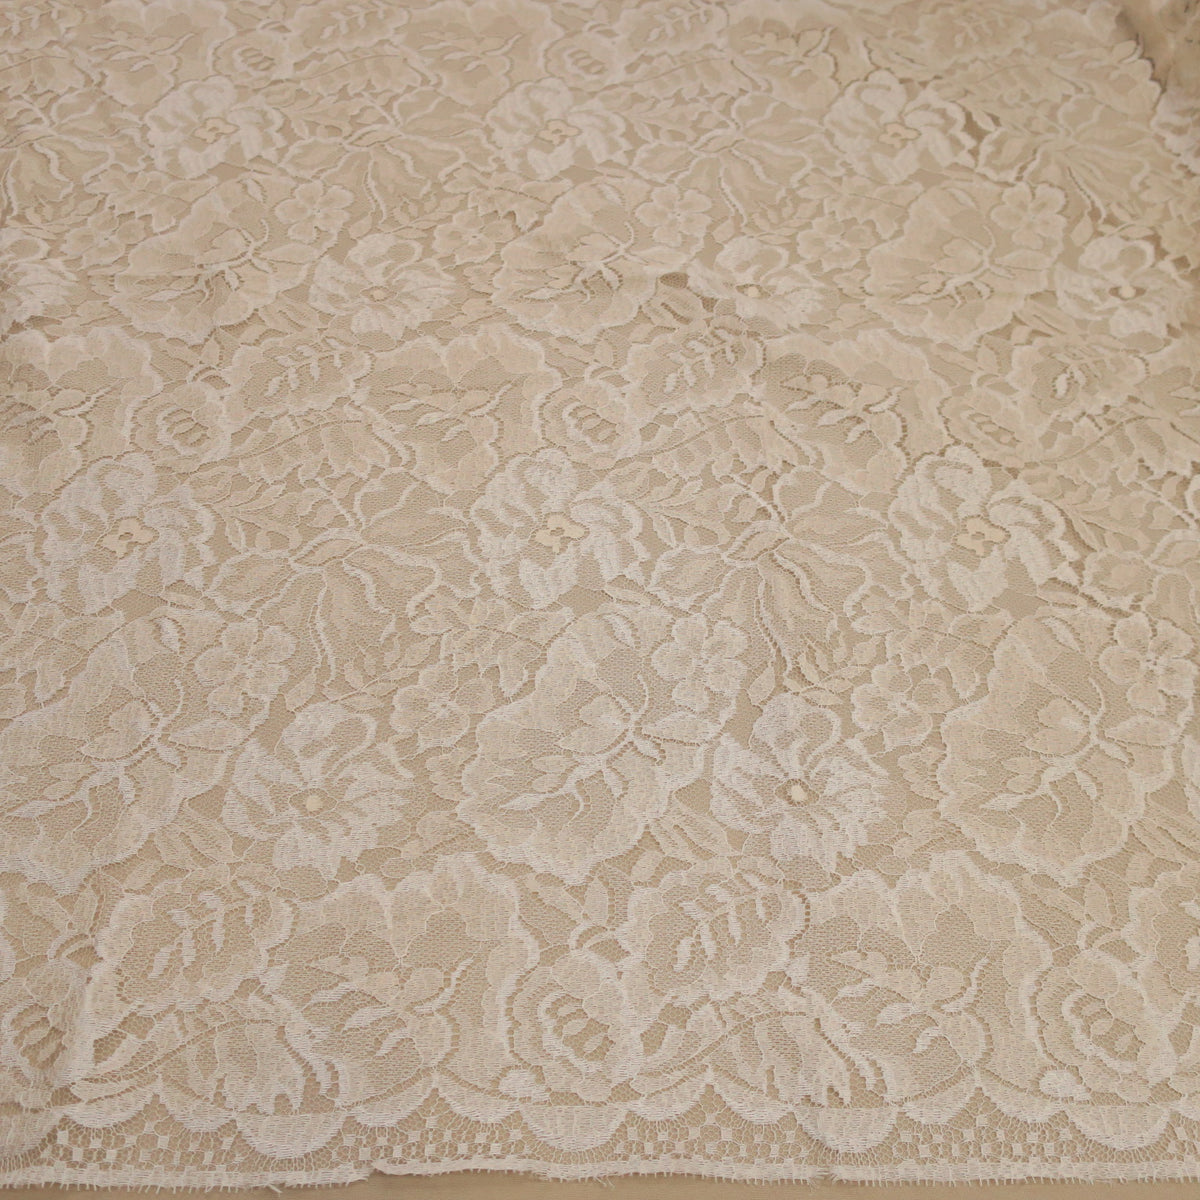 Off White and Ivory Embroidered Double Scalloped Lace | Rex Fabrics